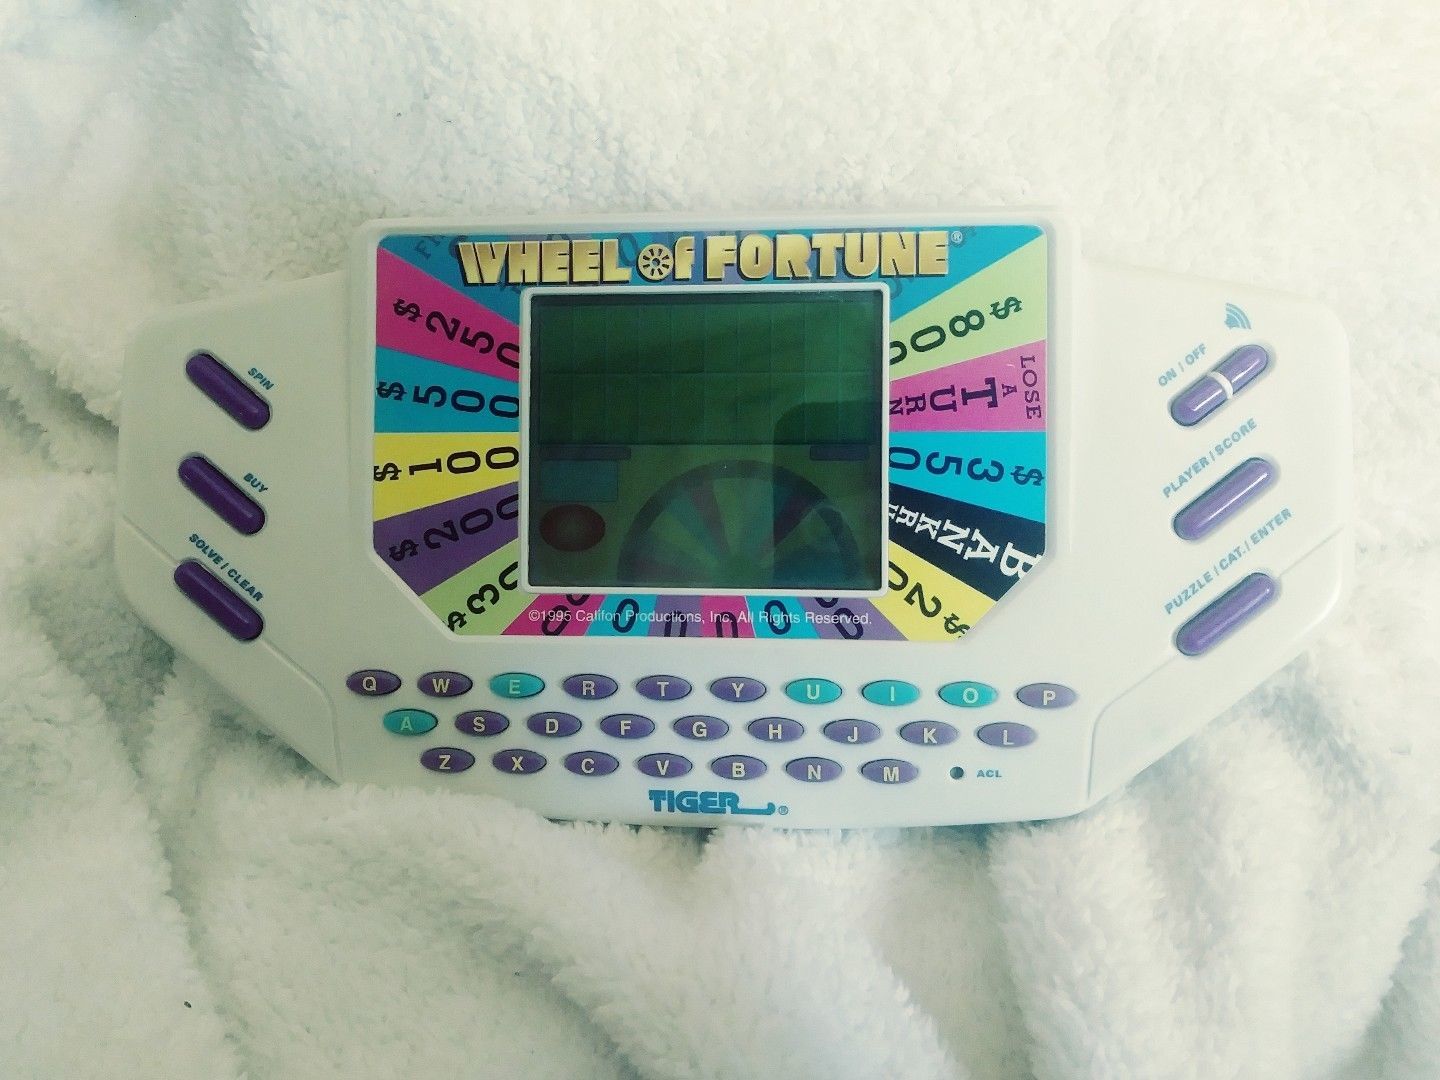 WHEEL OF FORTUNE HANDHELD GAME & CARTRIDGE TIGER Electronics Tested & Works - $120.99